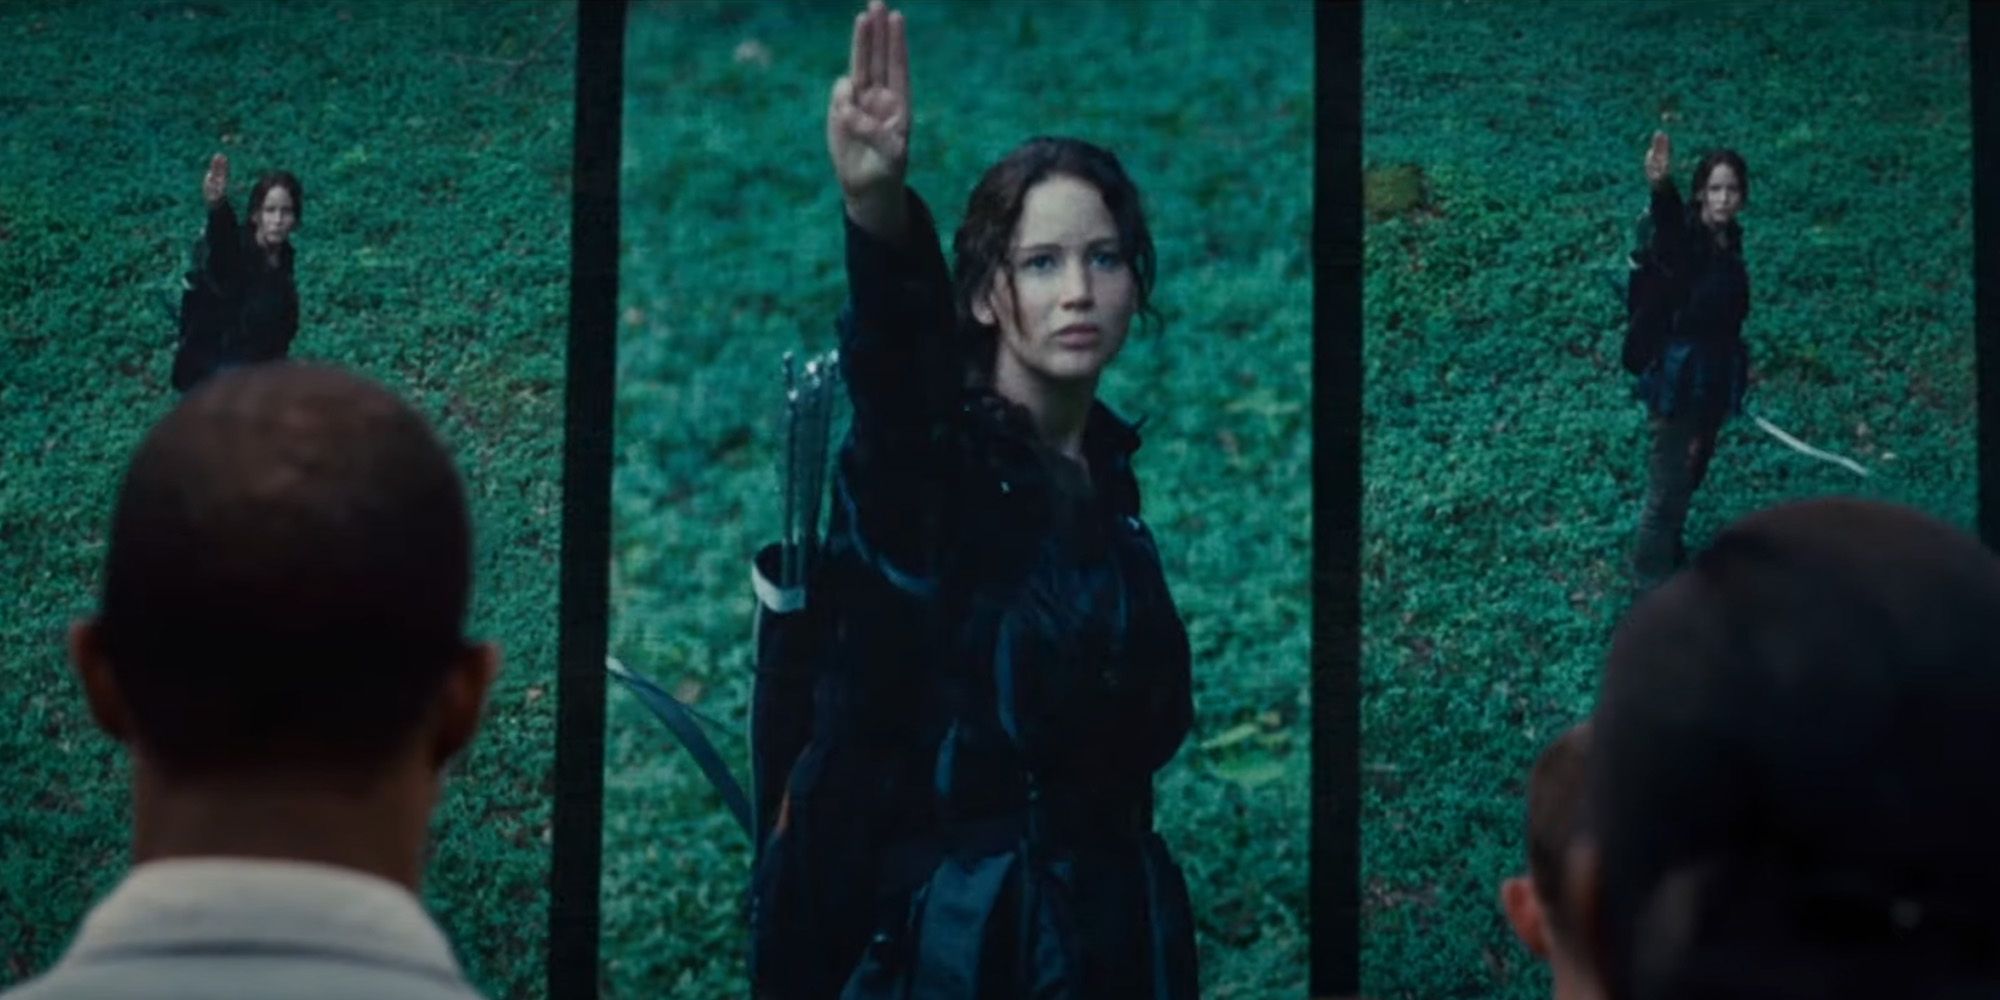 Jennifer Lawrence on a screen giving a signal in The Hunger Games